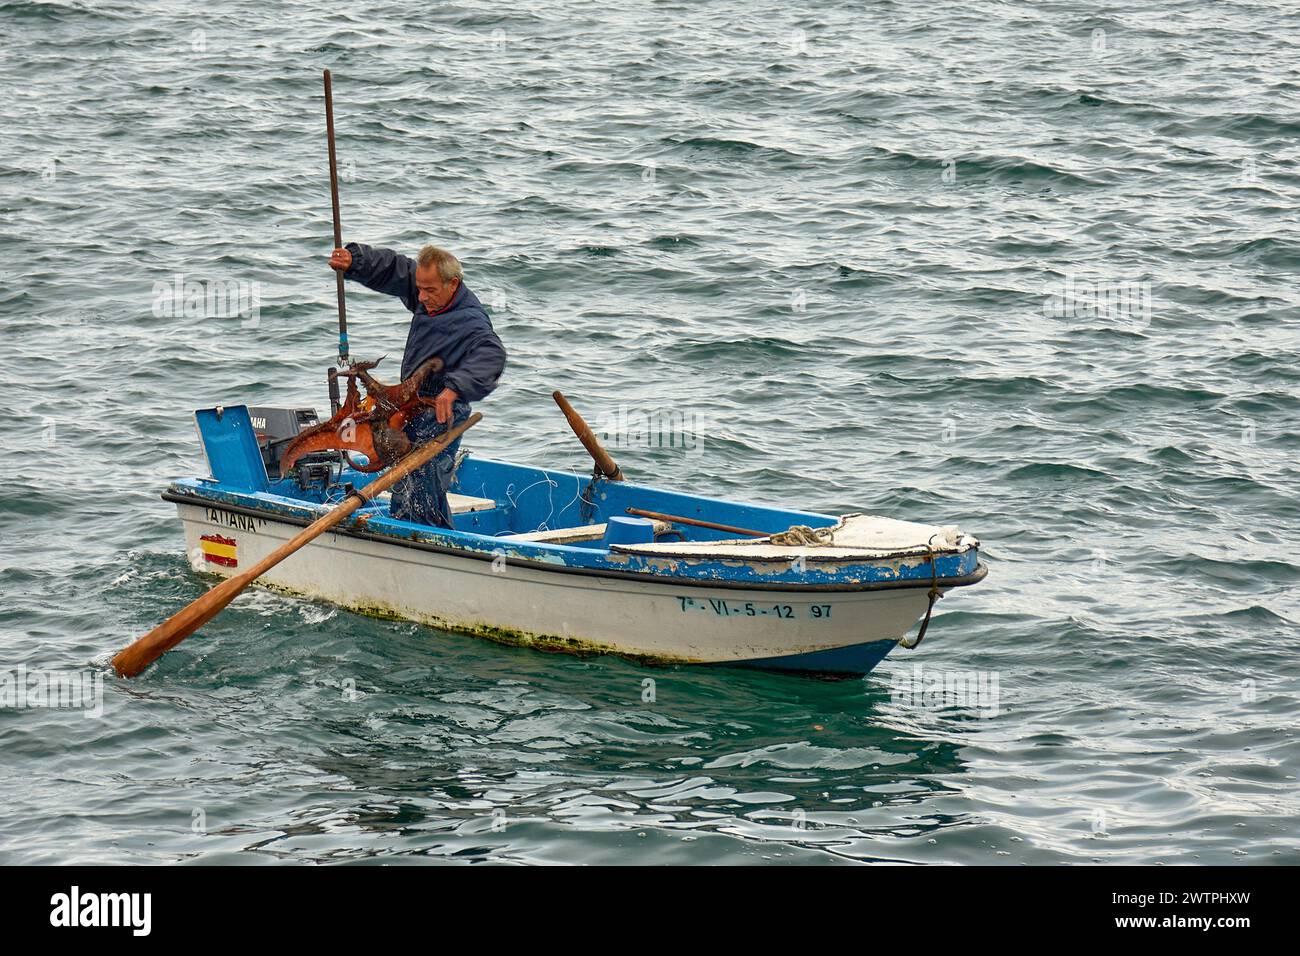 Vigo, Pontevedra, Spain; december, 18, 2022;Sailor in blue overalls has just caught an octopus with a line from his rowboat Stock Photo